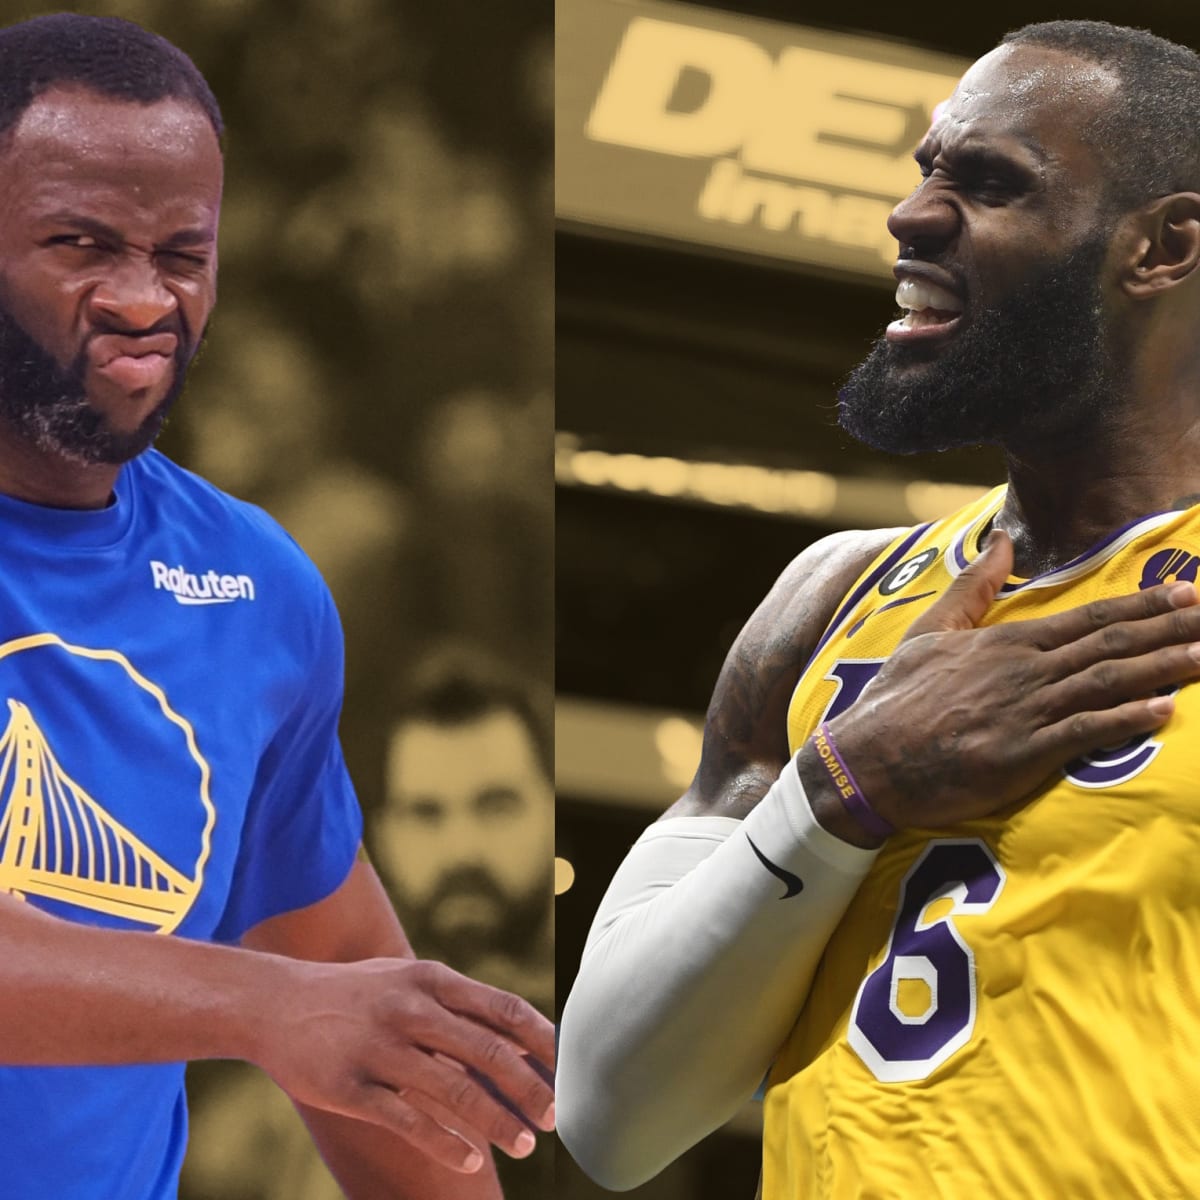 LeBron James & Draymond Green: Rivals Now Brothers